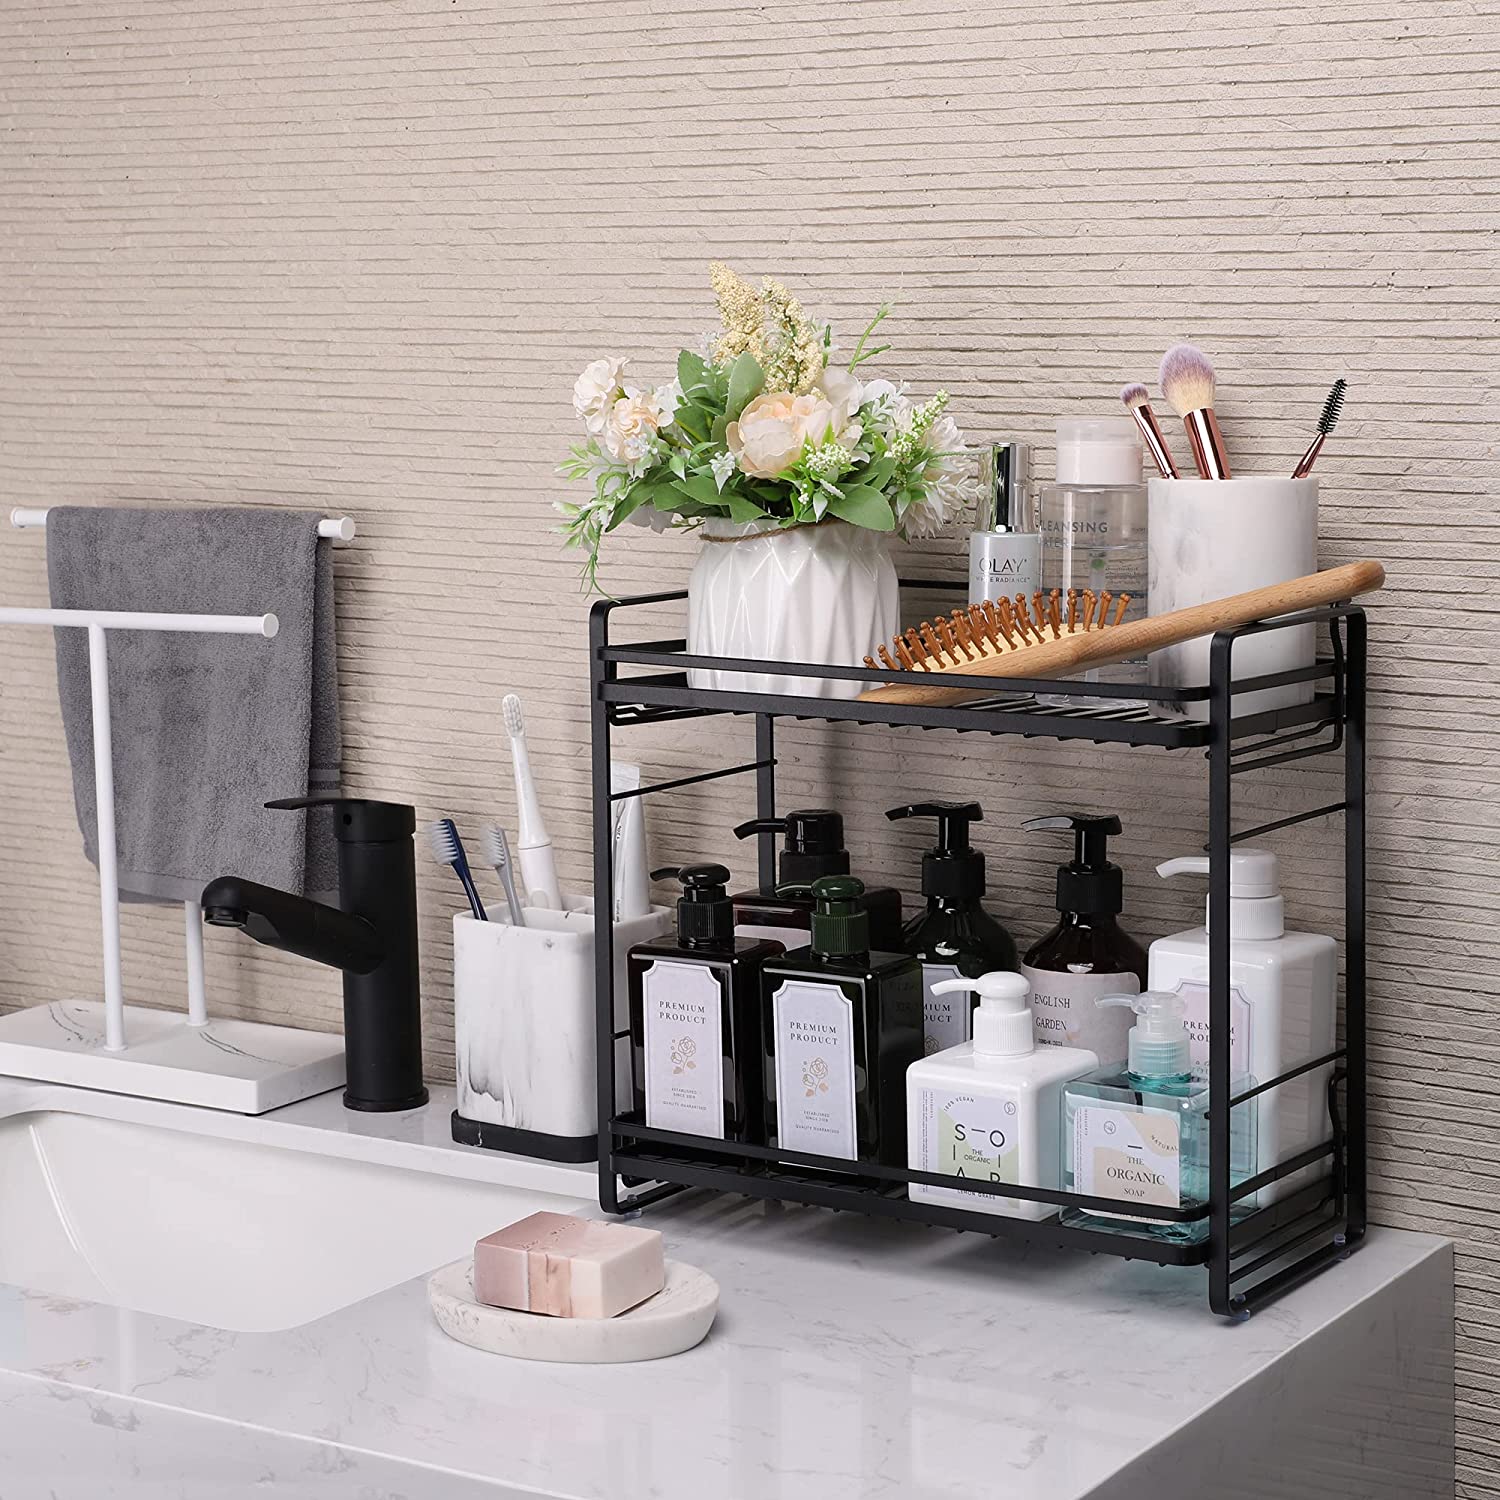 Use Stacking Rack on Countertop